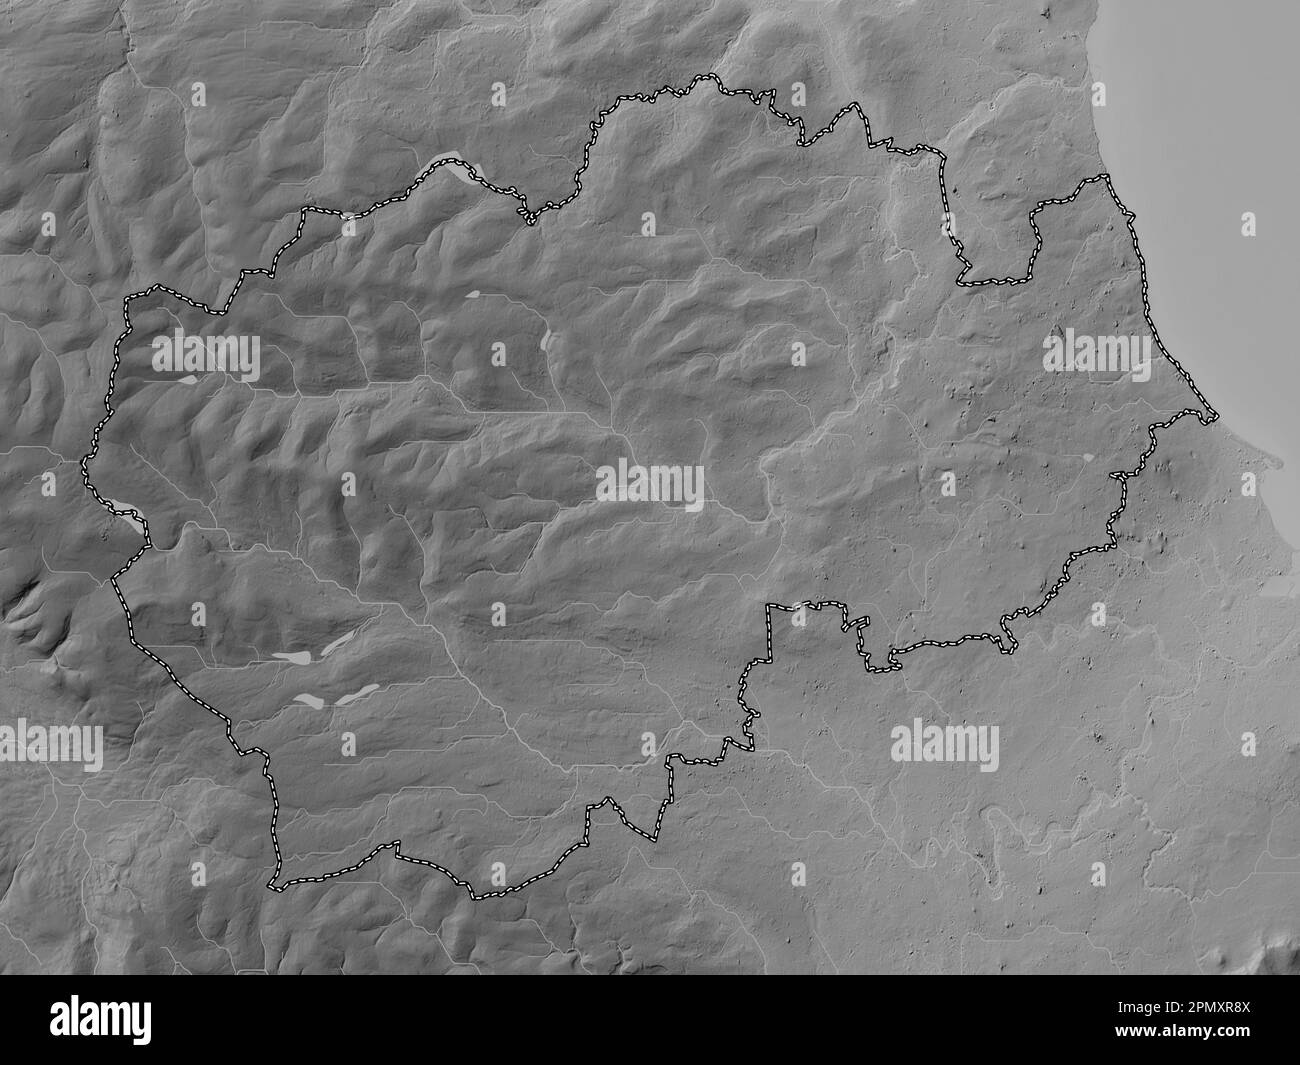 County Durham, administrative county of England - Great Britain. Grayscale elevation map with lakes and rivers Stock Photo